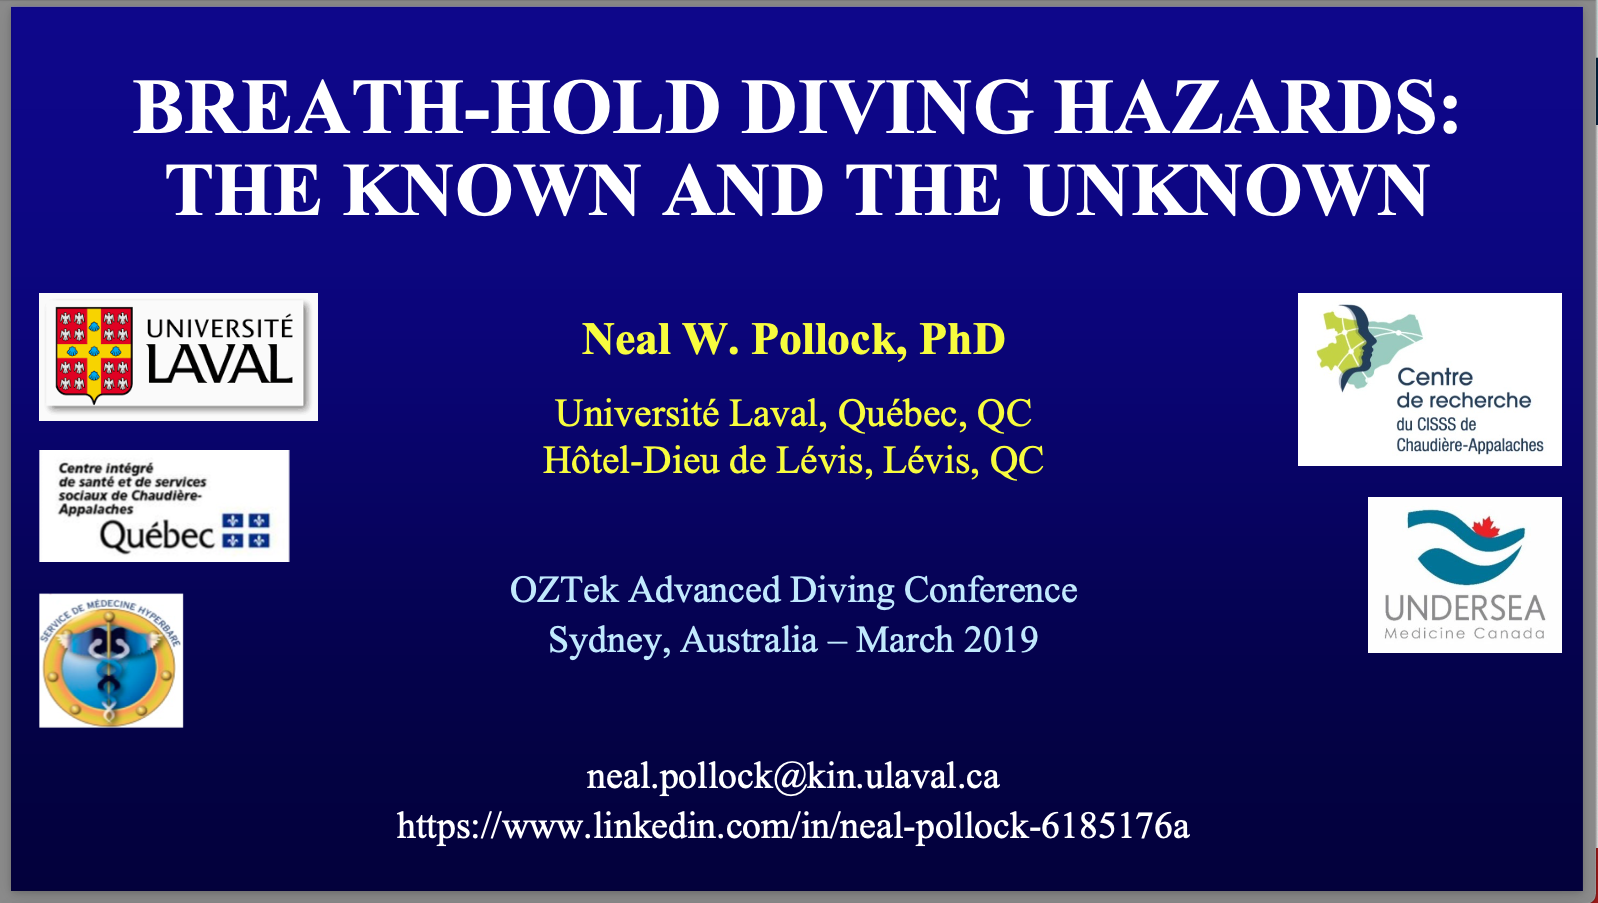 003: Freediving Hazards with Neal Pollock. The known and unknown.